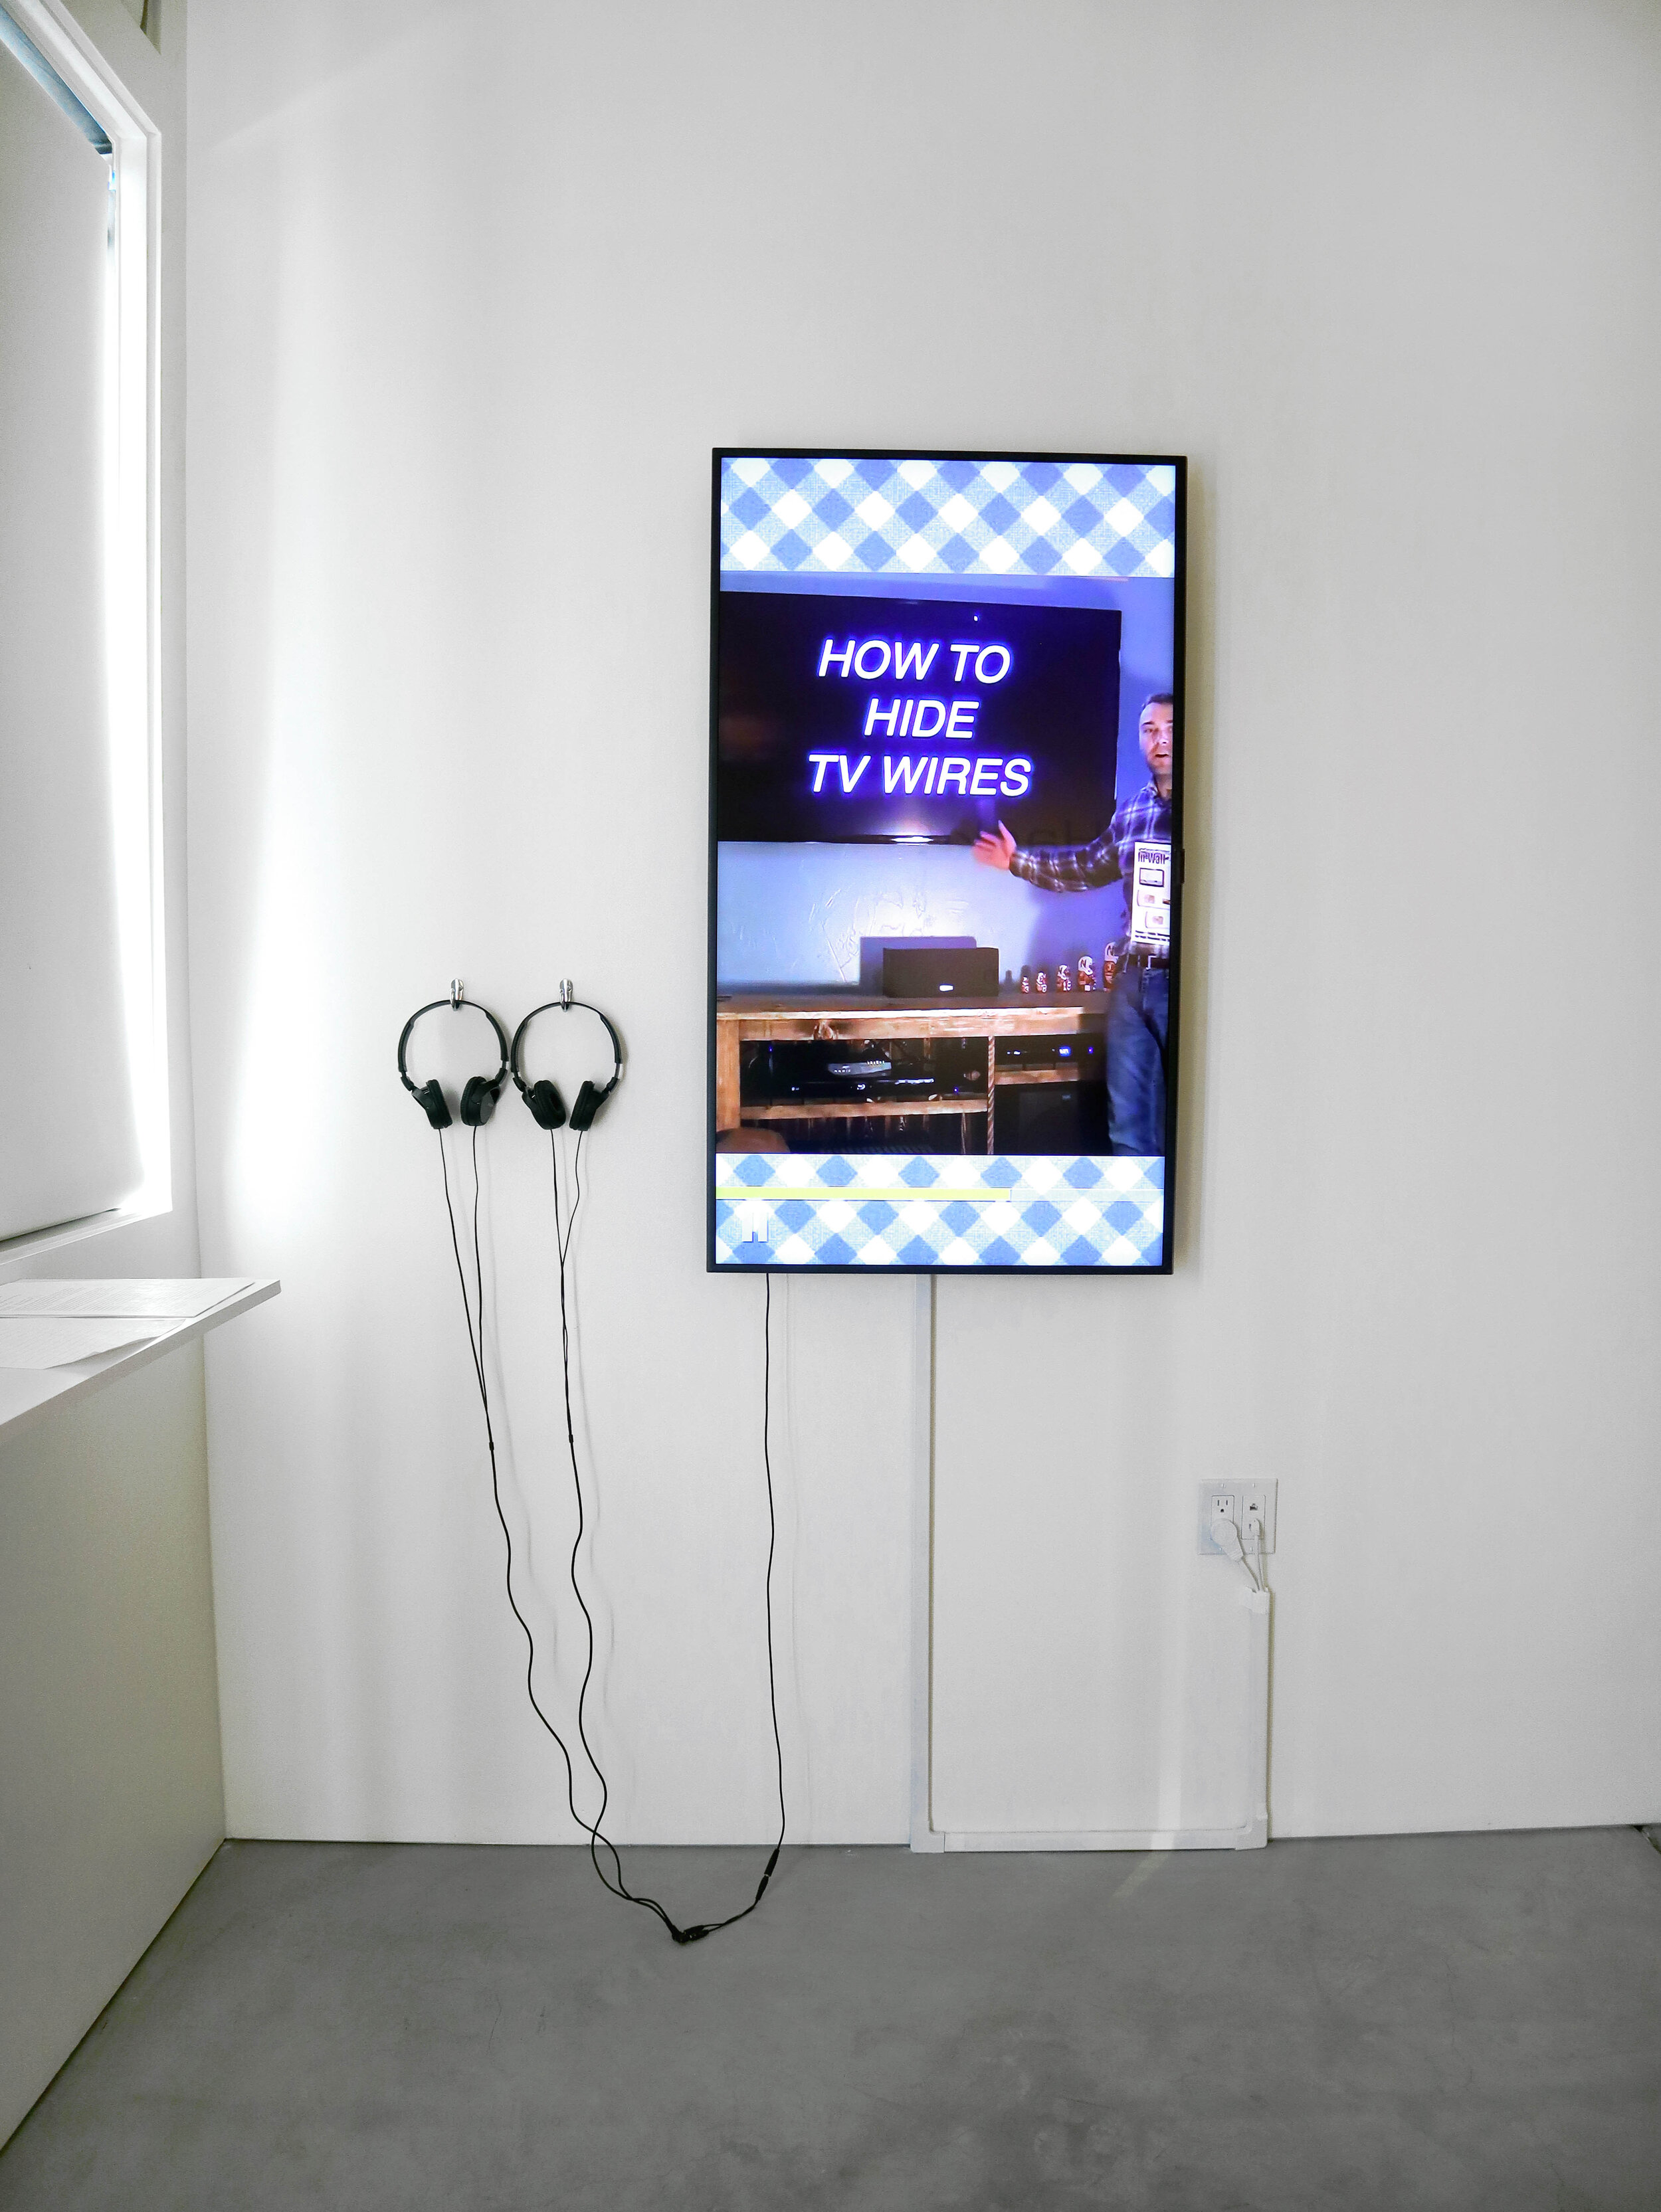  Life Hacks (and Other Embodied Technologies), group show  New Media and Performance Video  by Laura Gillmore, Faith Holland, and Laura Hyunjhee Kim  January 17th – February 29th, 2020 